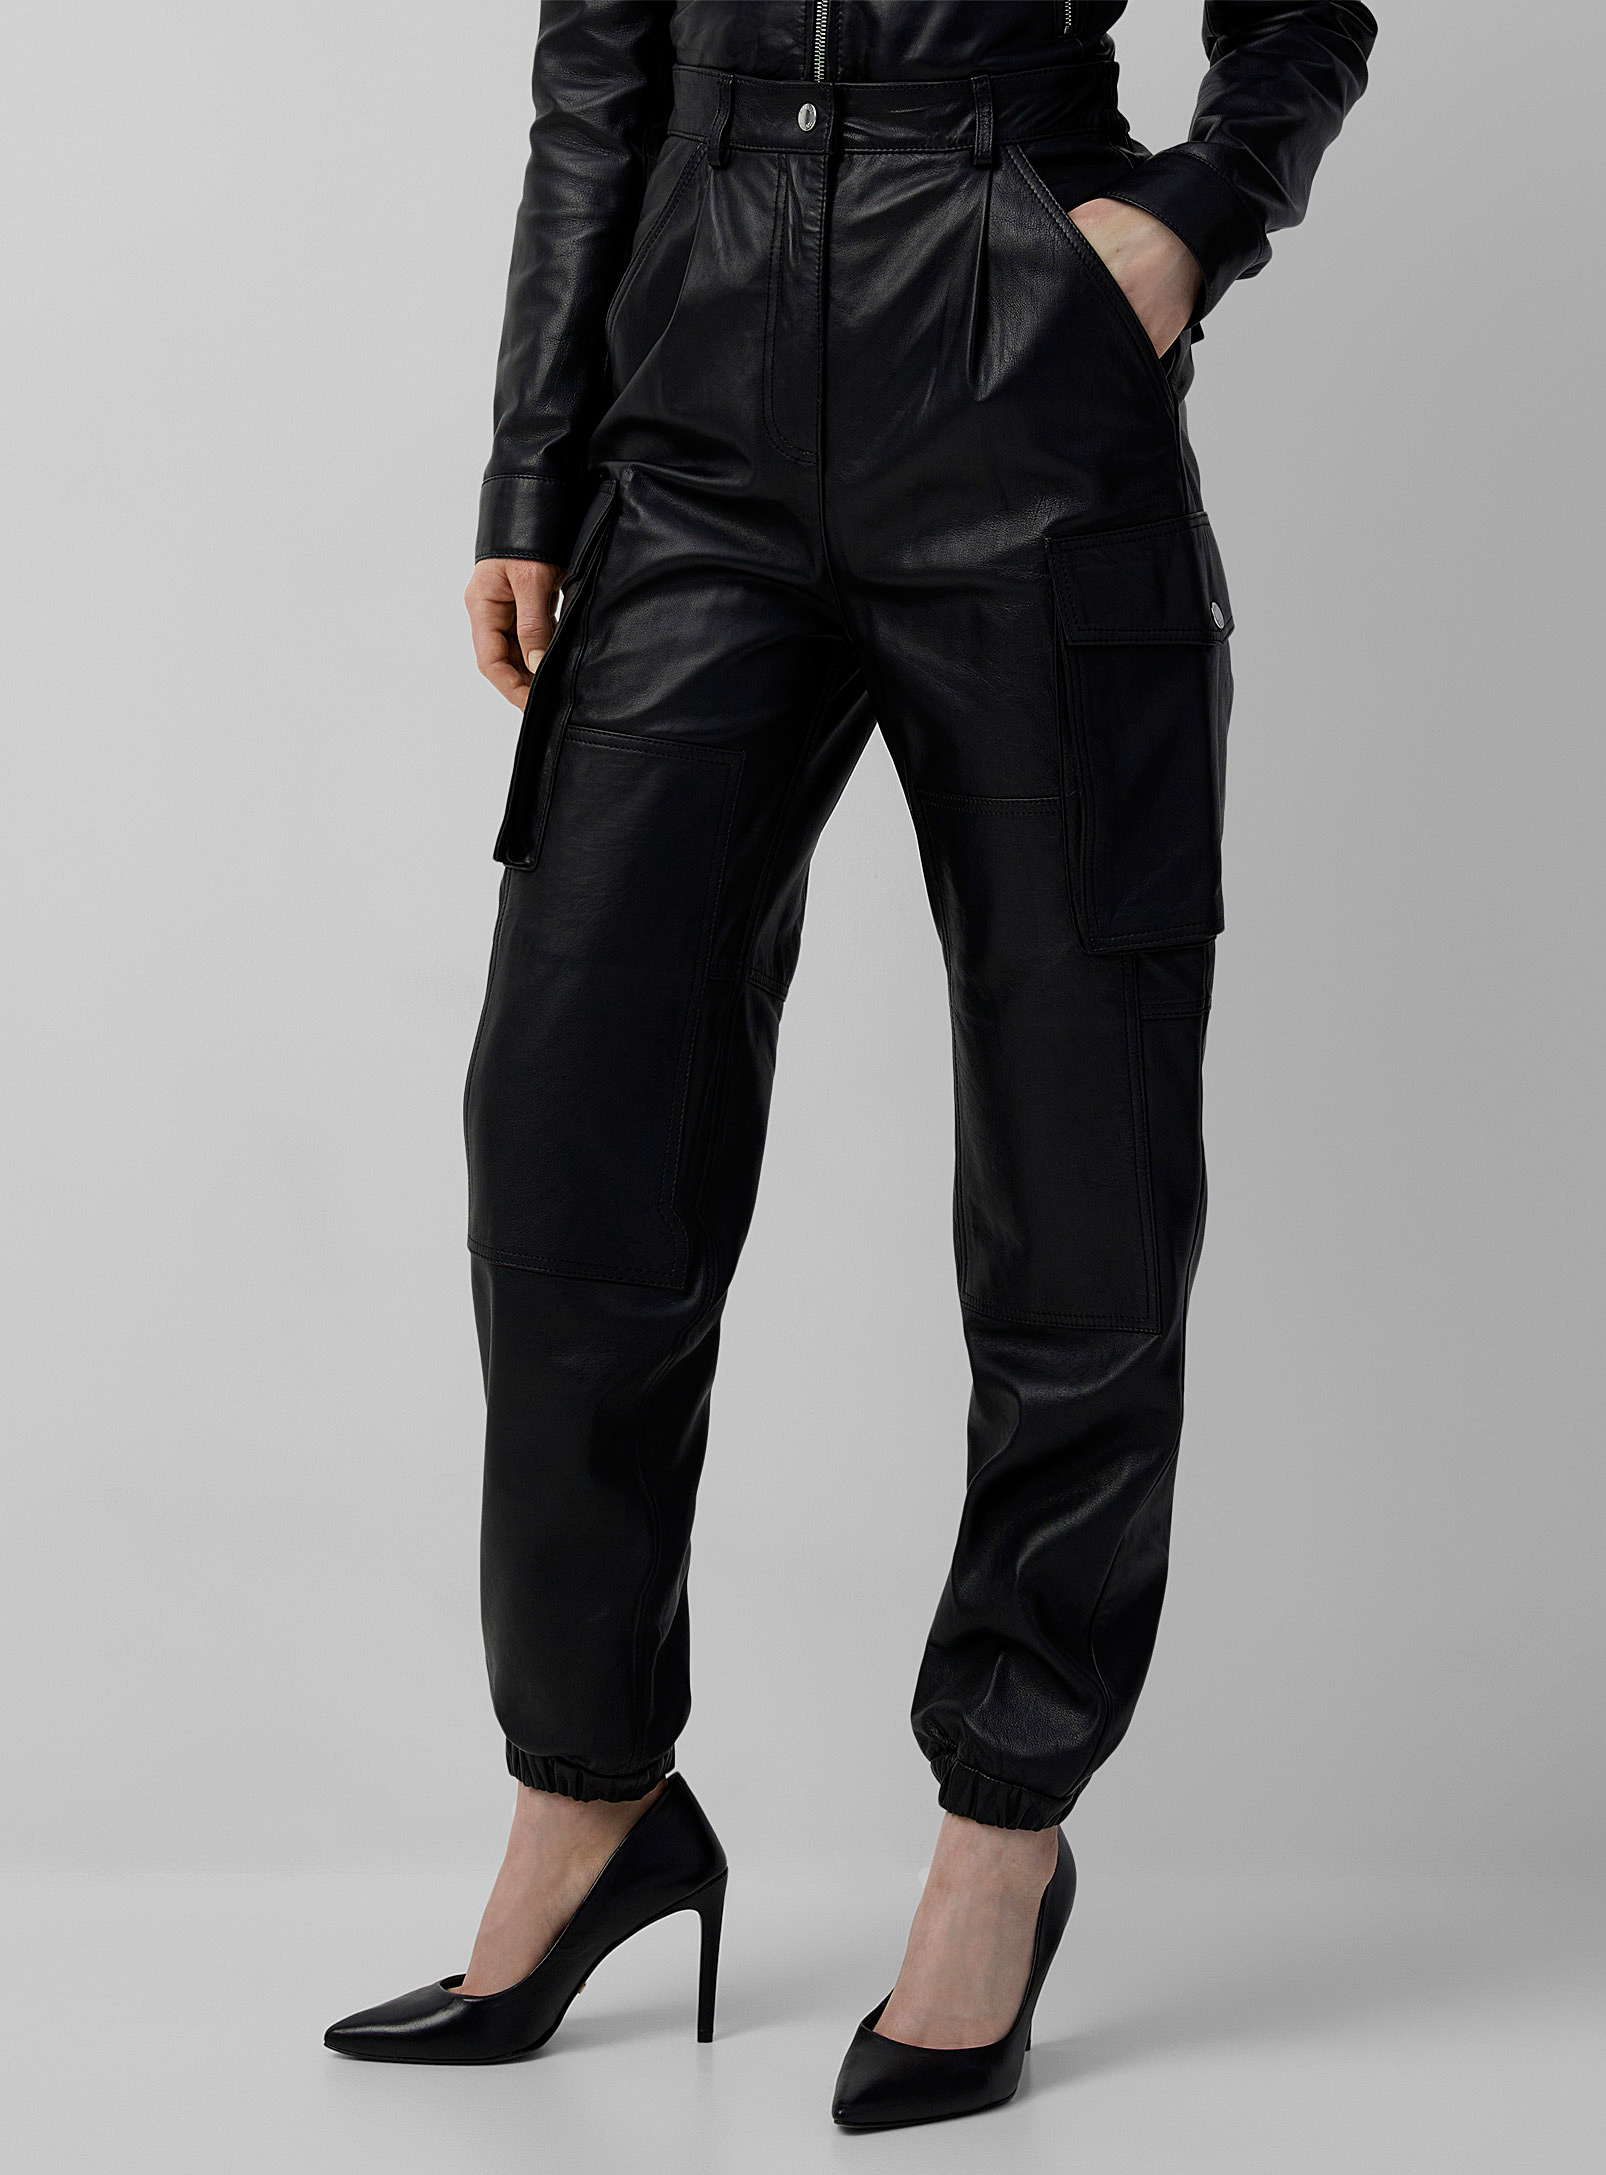 Moschino Jeans - Women's Leather cargo pant